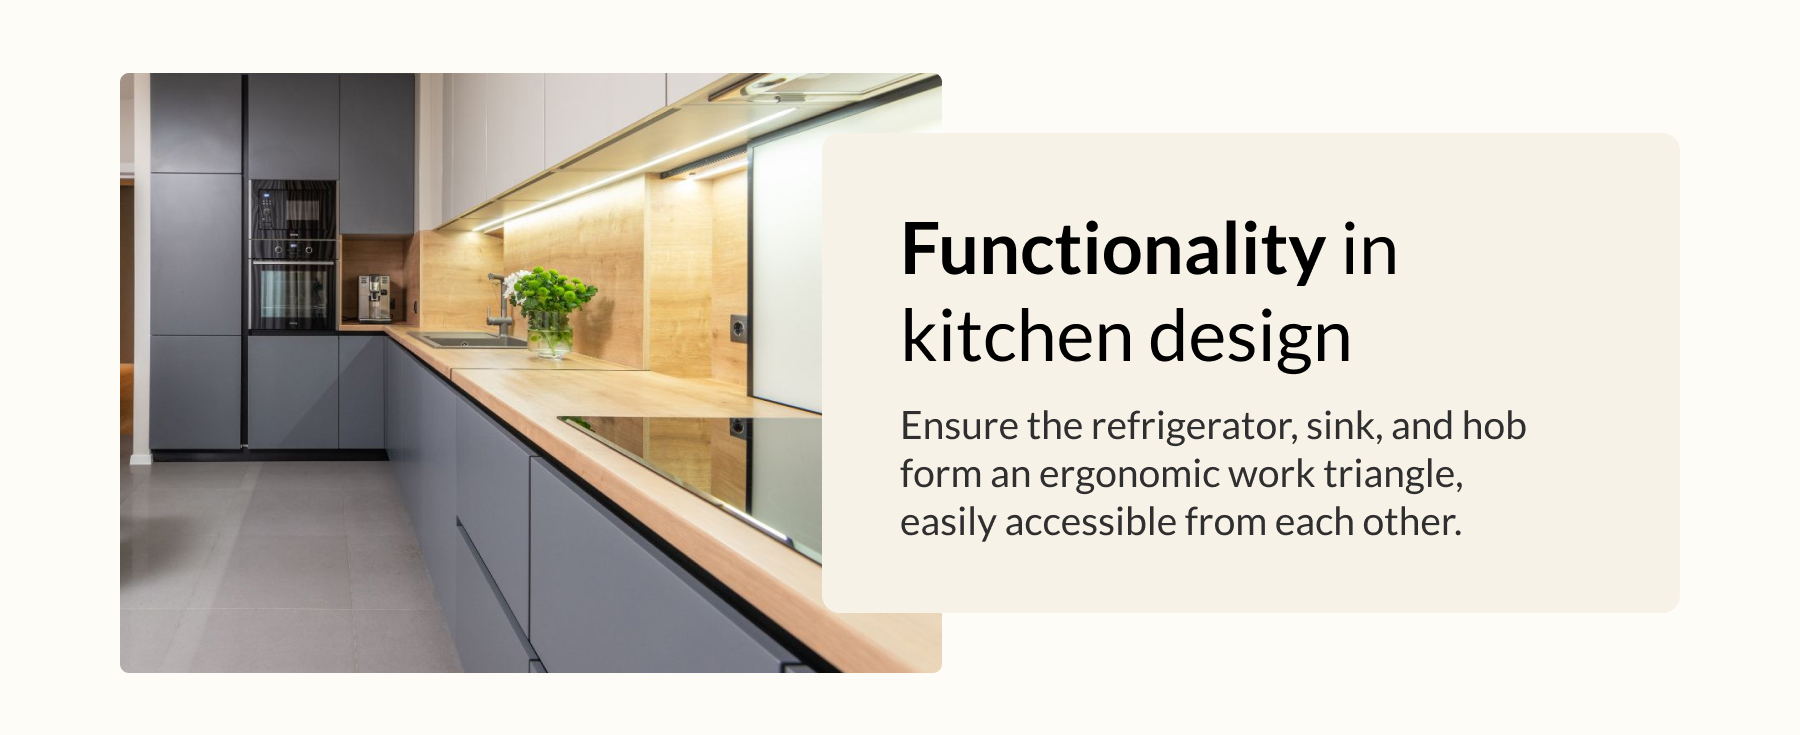 Functionality in kitchen design